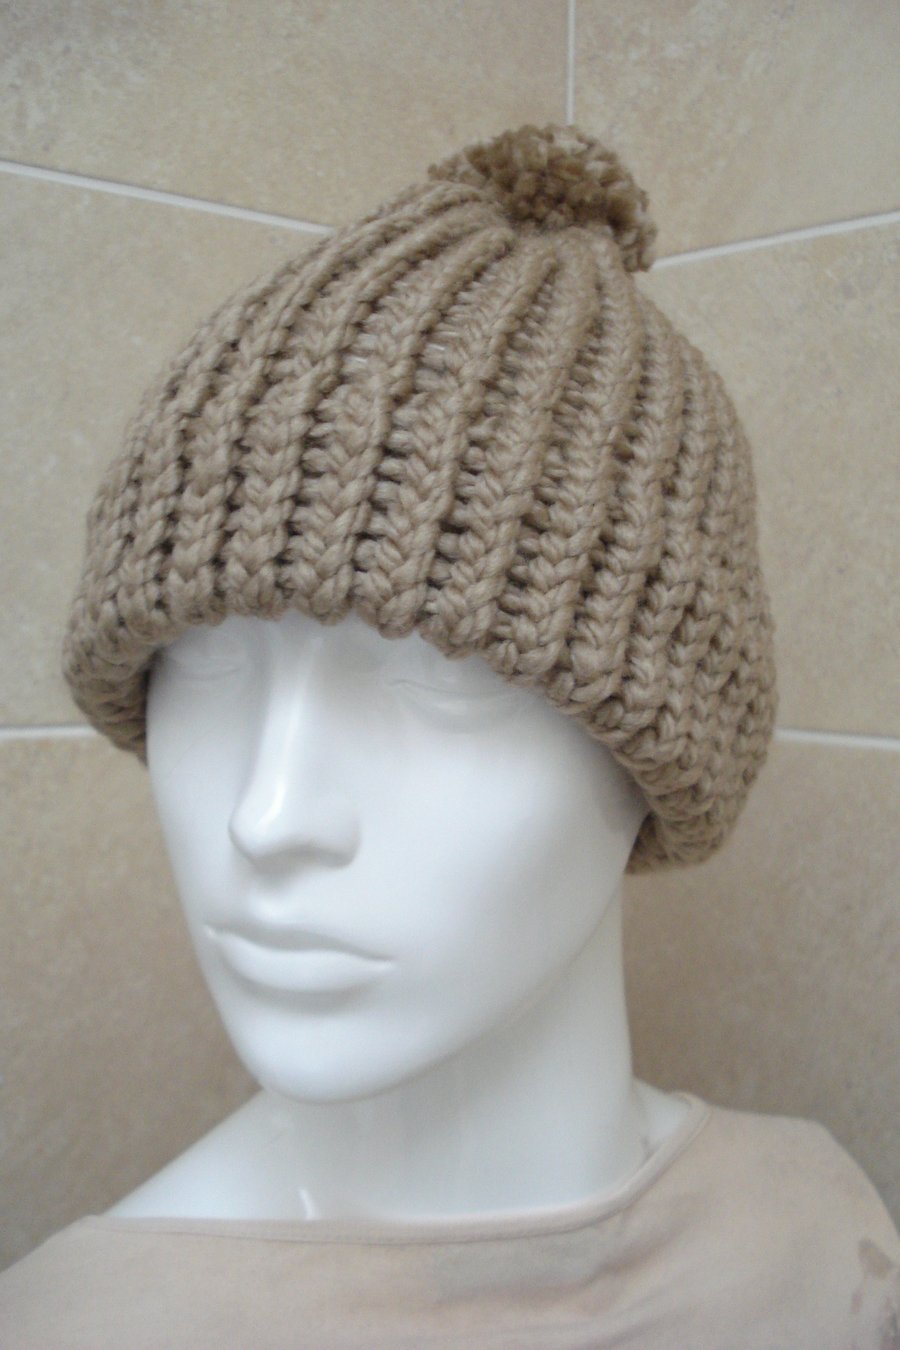 Camel Coloured Chunky Hat Small Adult Or Teen (A30)